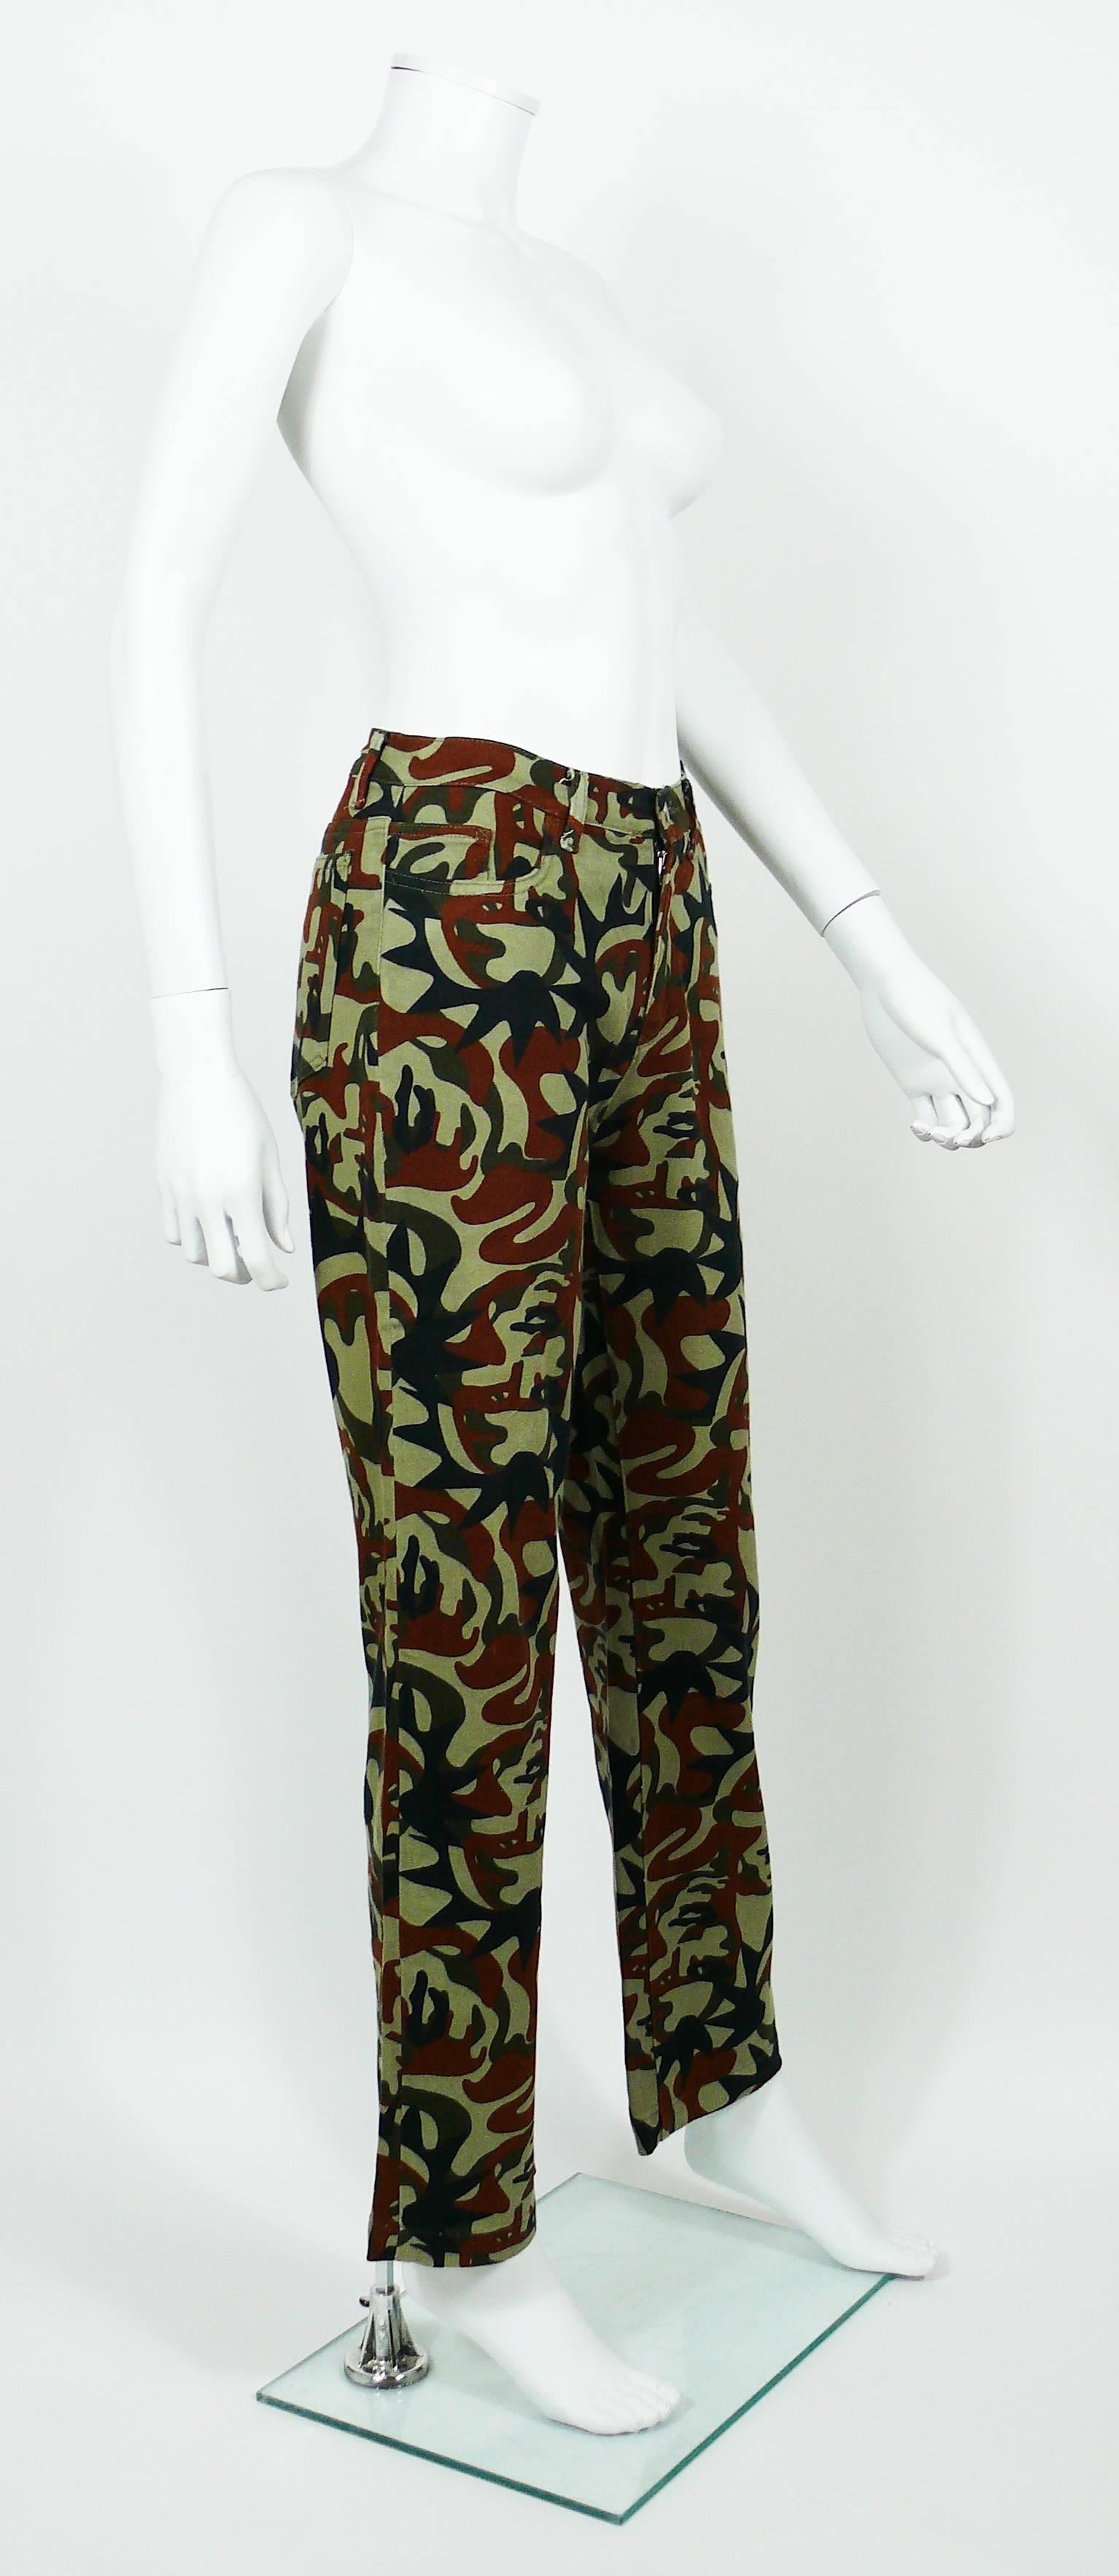 JEAN PAUL GAULTIER vintage pants trousers featuring a camouflage design with faces.

These trousers feature :
- Stretchy fabric.
- Front zip closure.
- Front and back pockets.
- Belt loops and signature brand loop at the back.

Label reads JPG